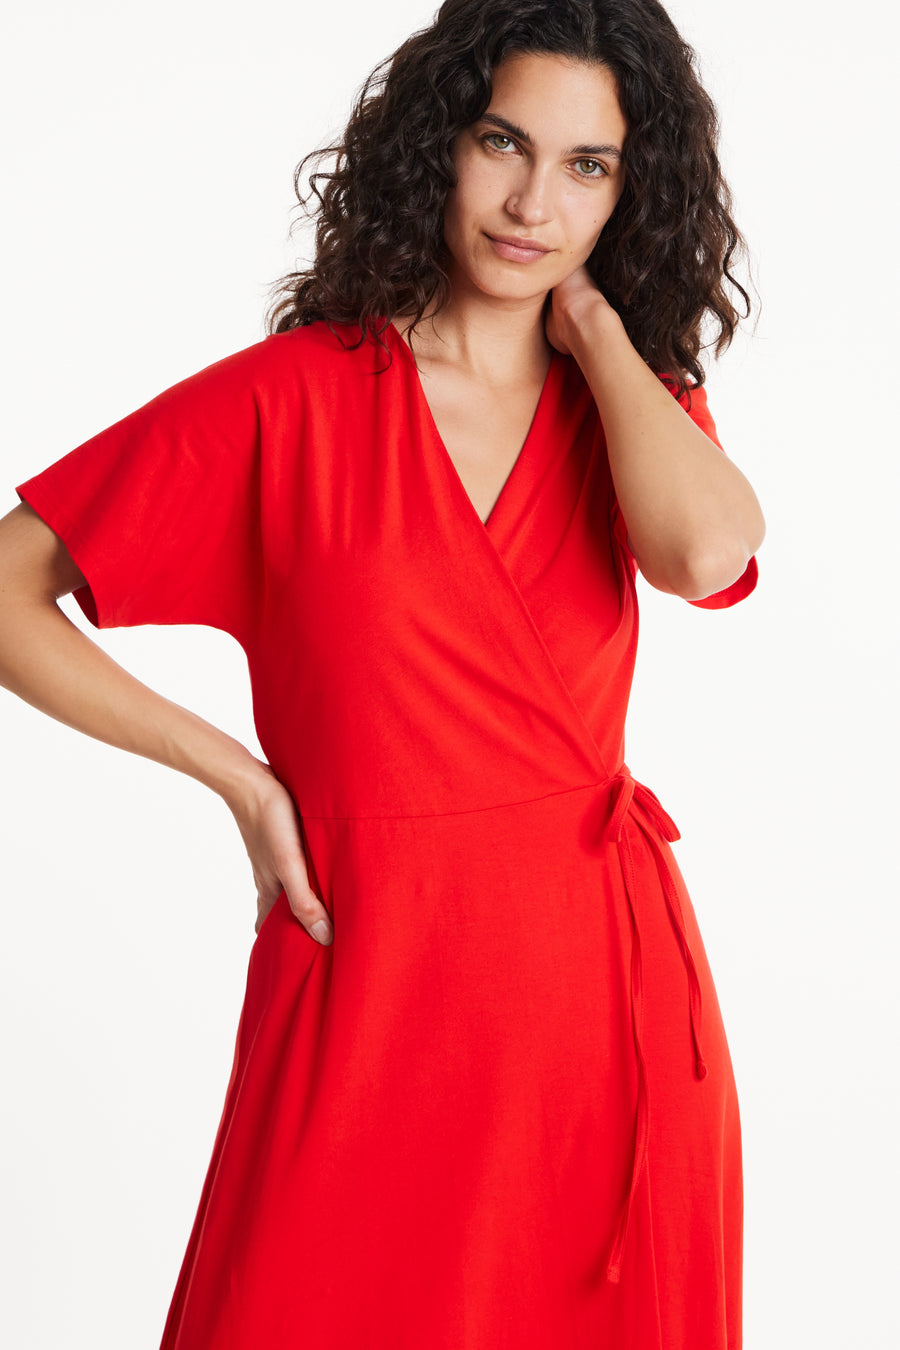 People Tree Fair Trade, Ethical & Sustainable Leora Wrap Dress in Red 95% organic certified cotton, 5% elastane